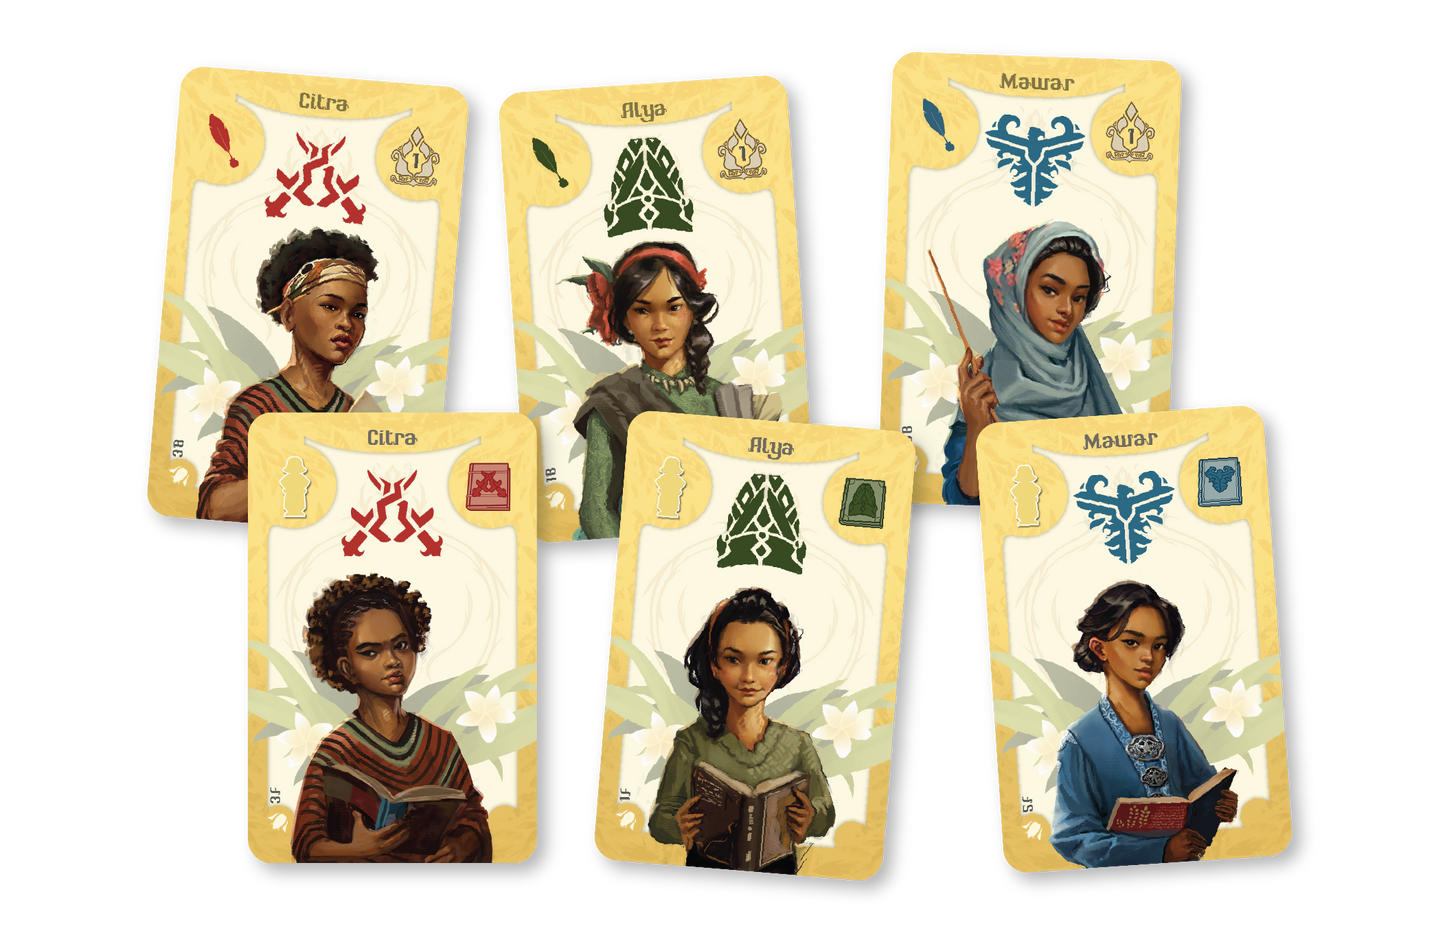 Kartini - From Darkness to Light component student cards